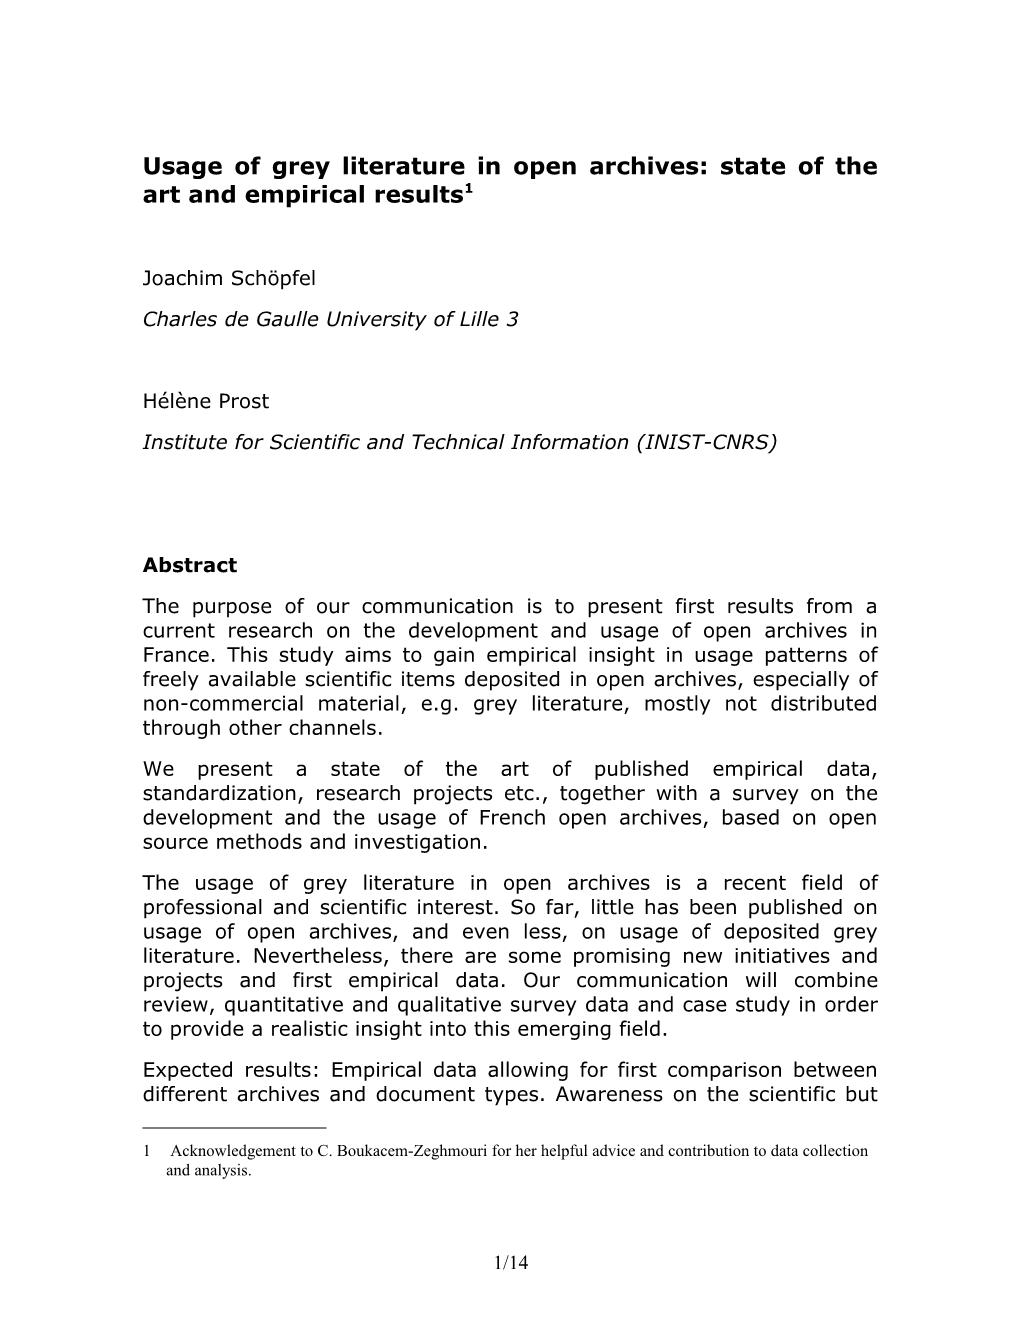 Usage of Grey Literature in Open Archives: State of the Art and Empirical Results